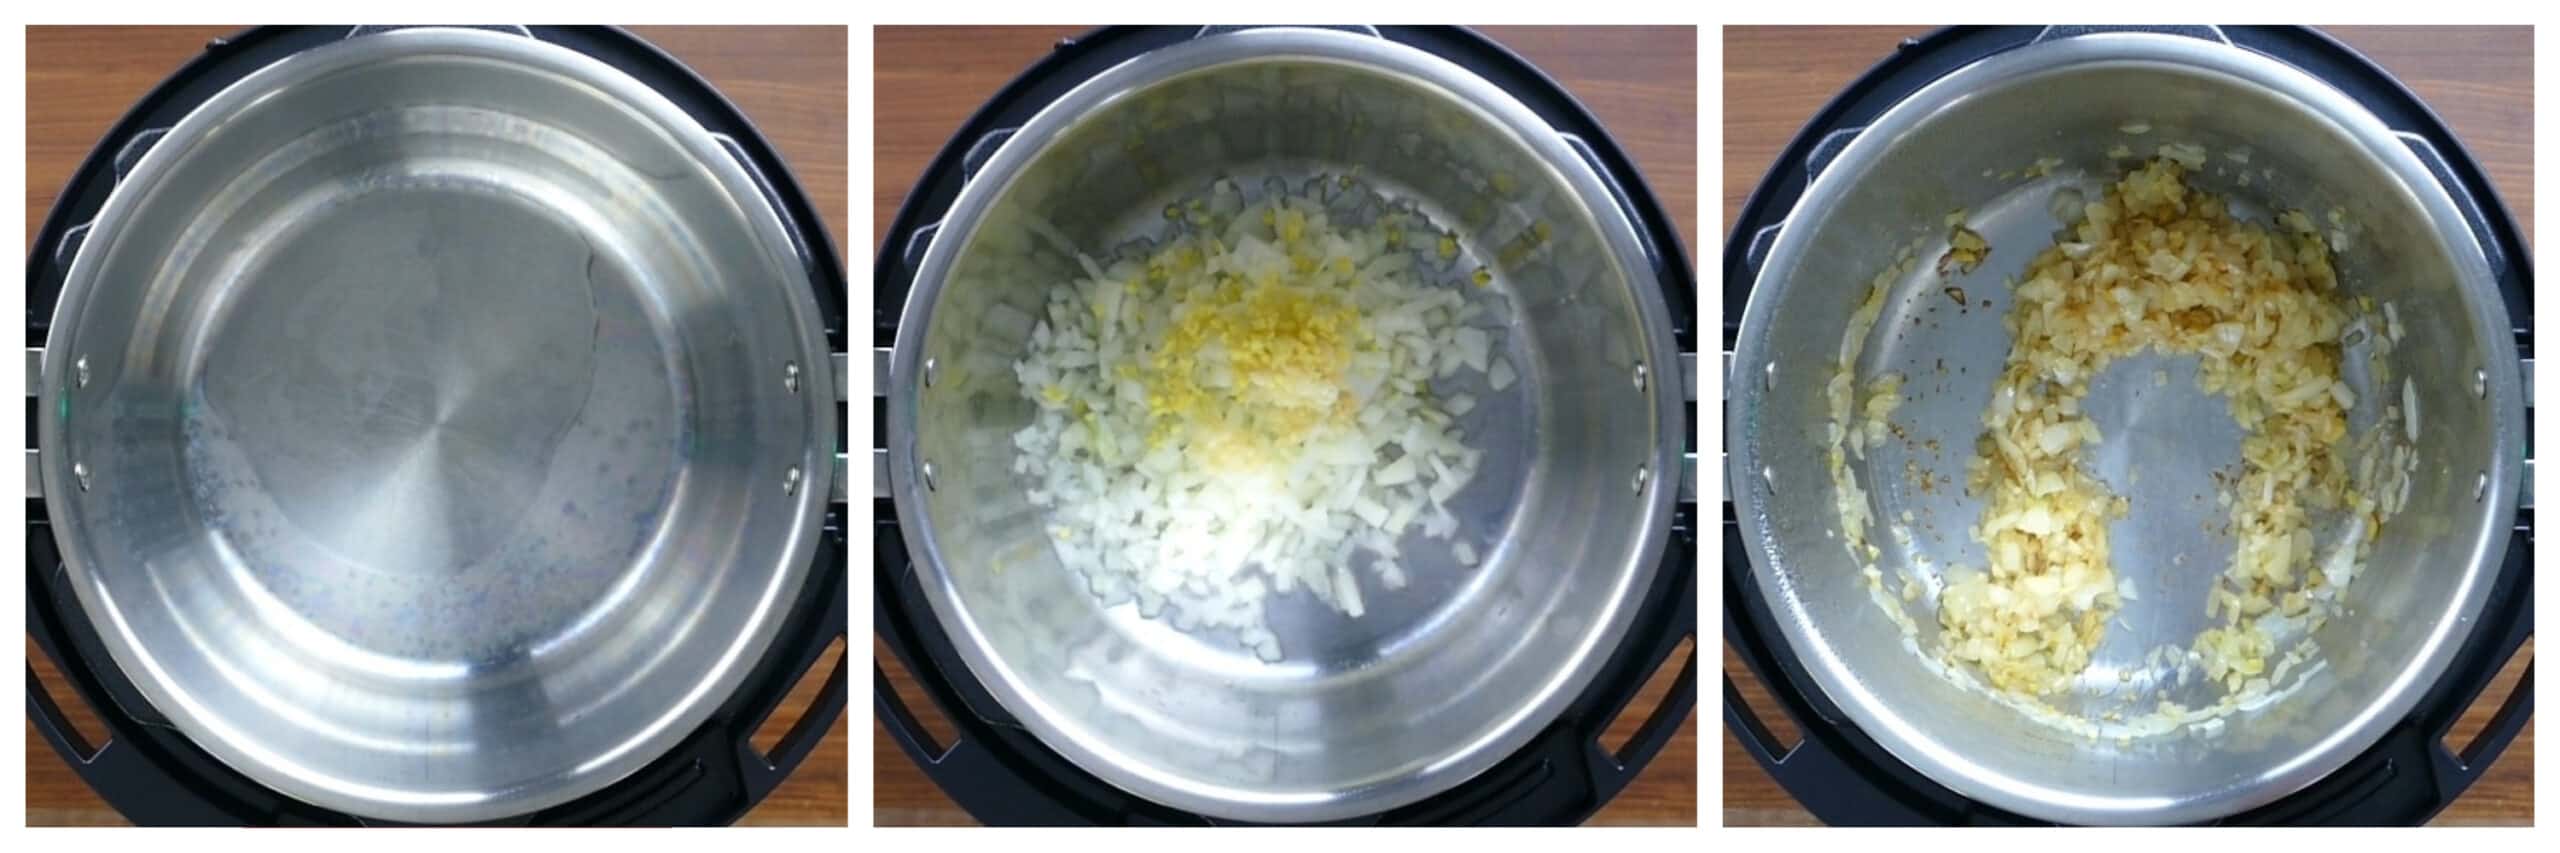 Instant Pot Curried Risotto Instructions collage - oil, onions, sauteed